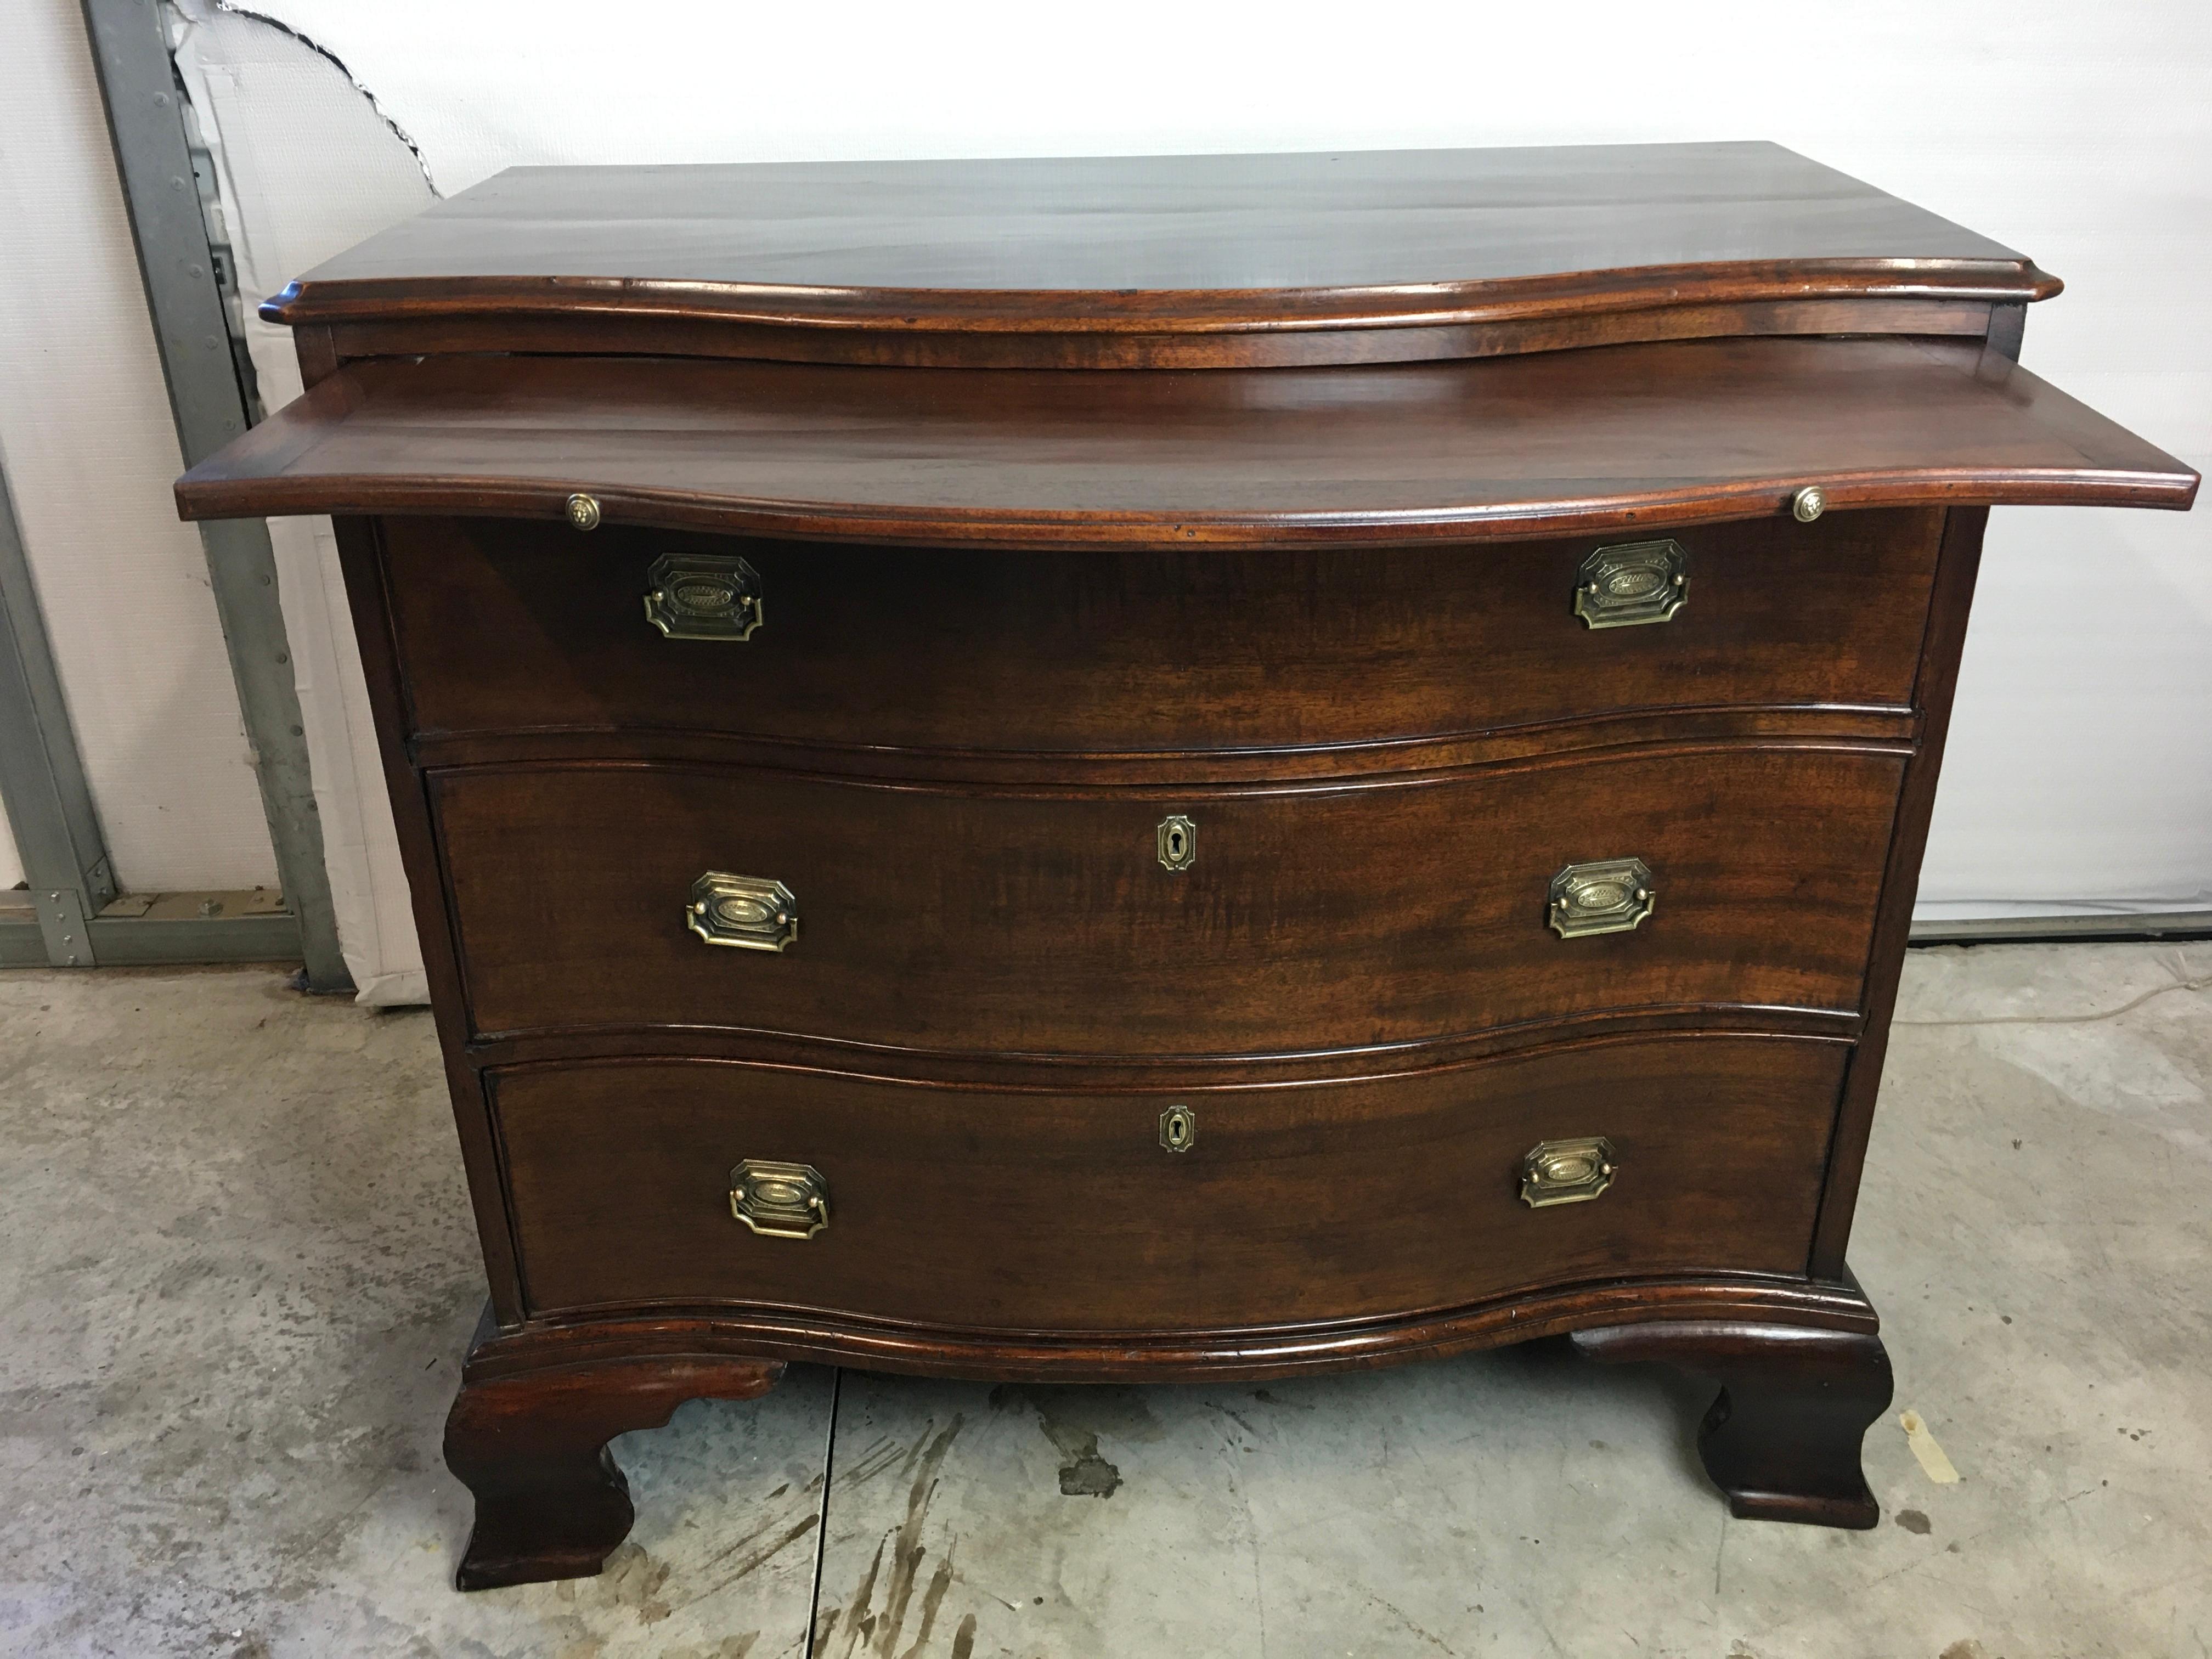  Georgian Mahogany serpentine front bachelors chest resting on tall ogee bracket feet 1790-1800.  Nicely figured solid Cuban Mahogany molded edge top over a pull out brushing slide and three large graduated cock beaded drawers. Secondary woods are